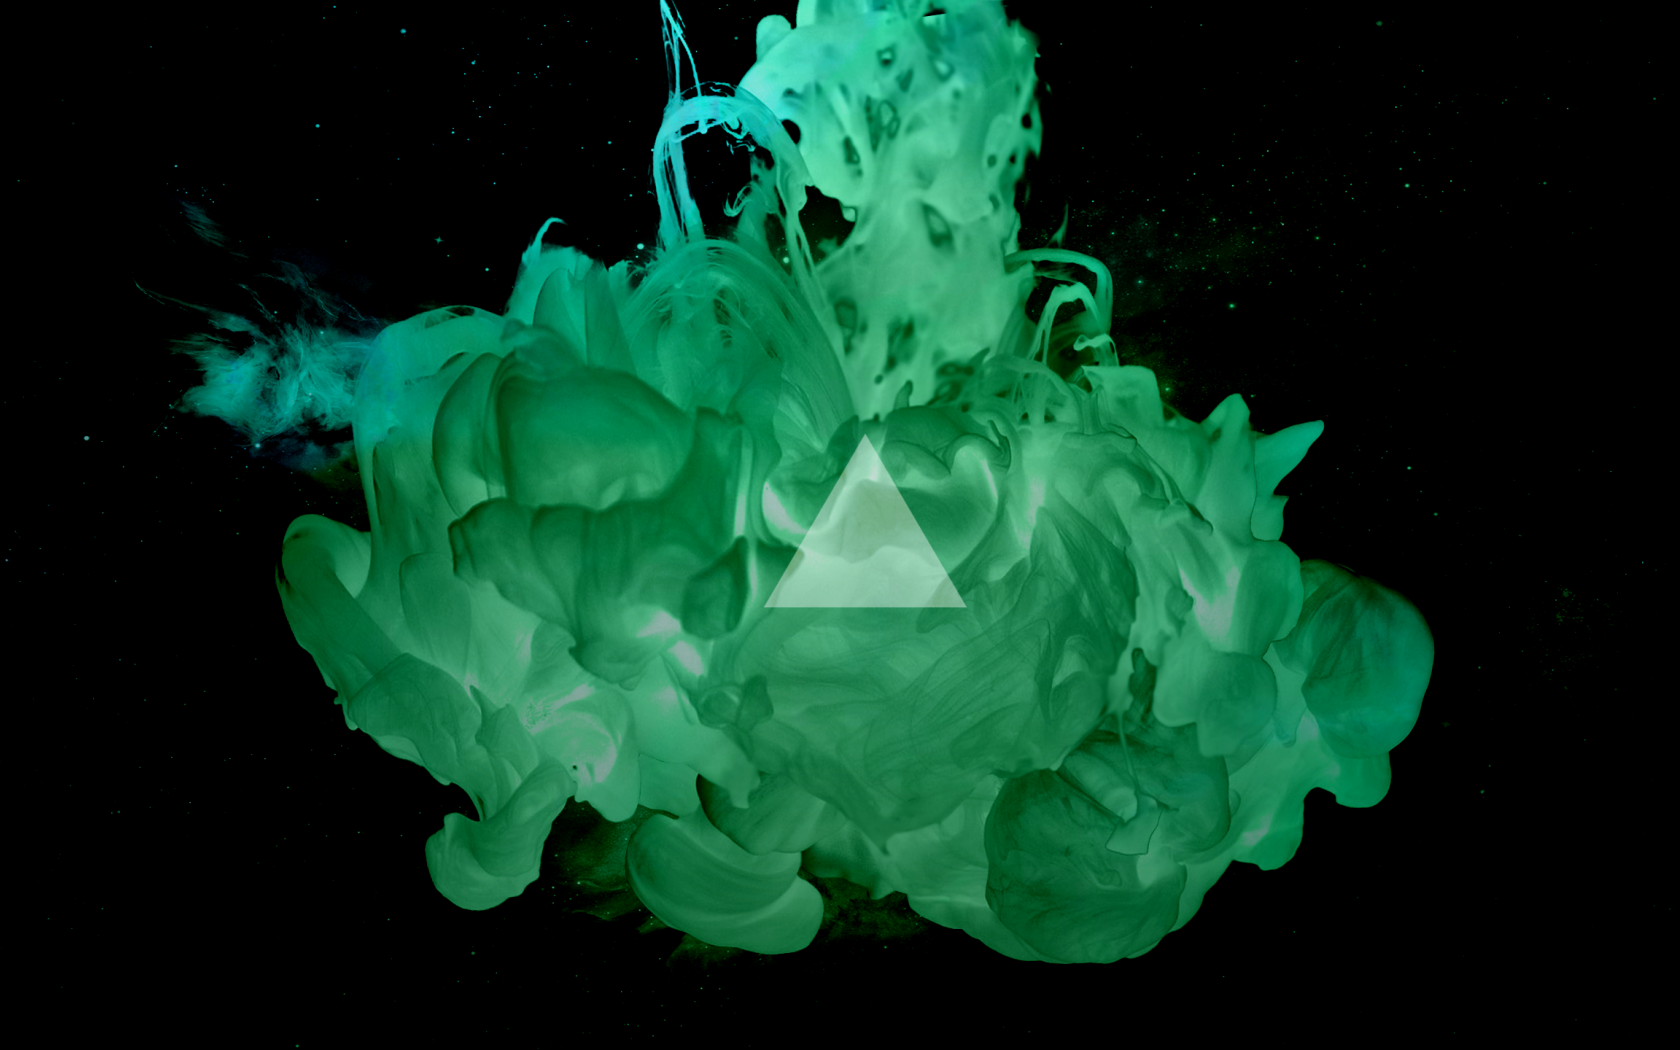 The triangle on the background of green smoke